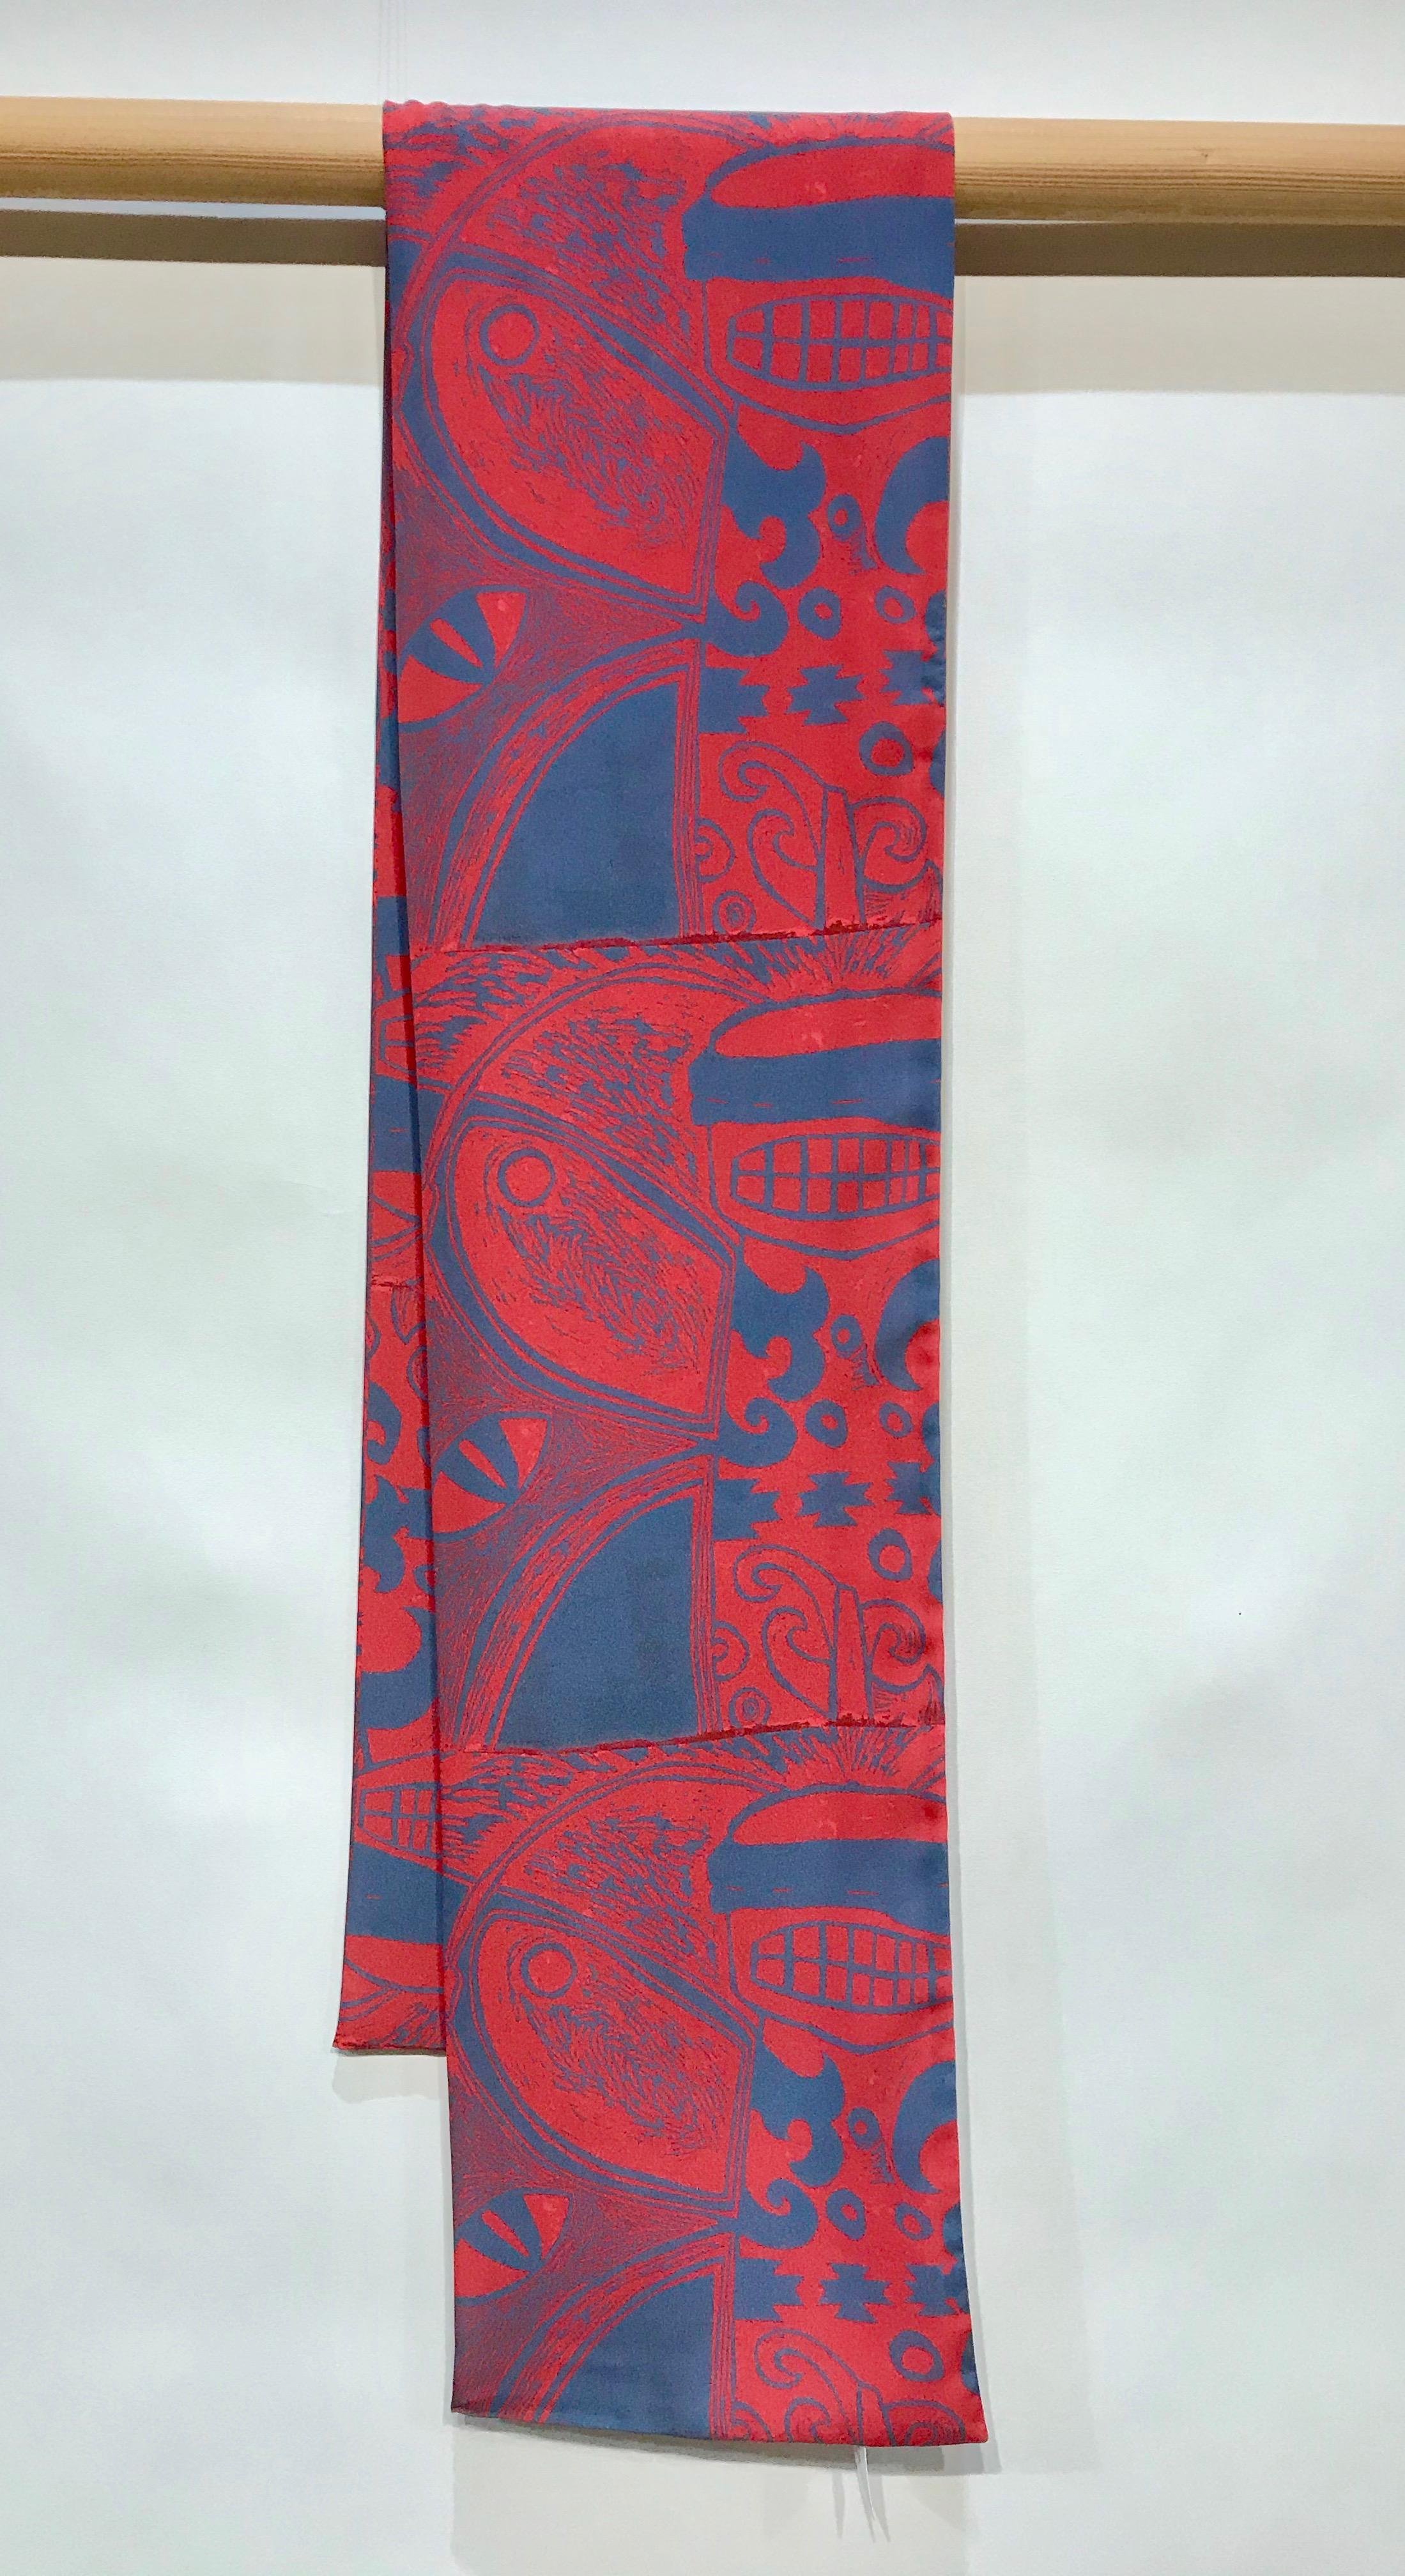 He Sees, poly crepe de Chine scarf, bee,red,blue, artist design, Native American